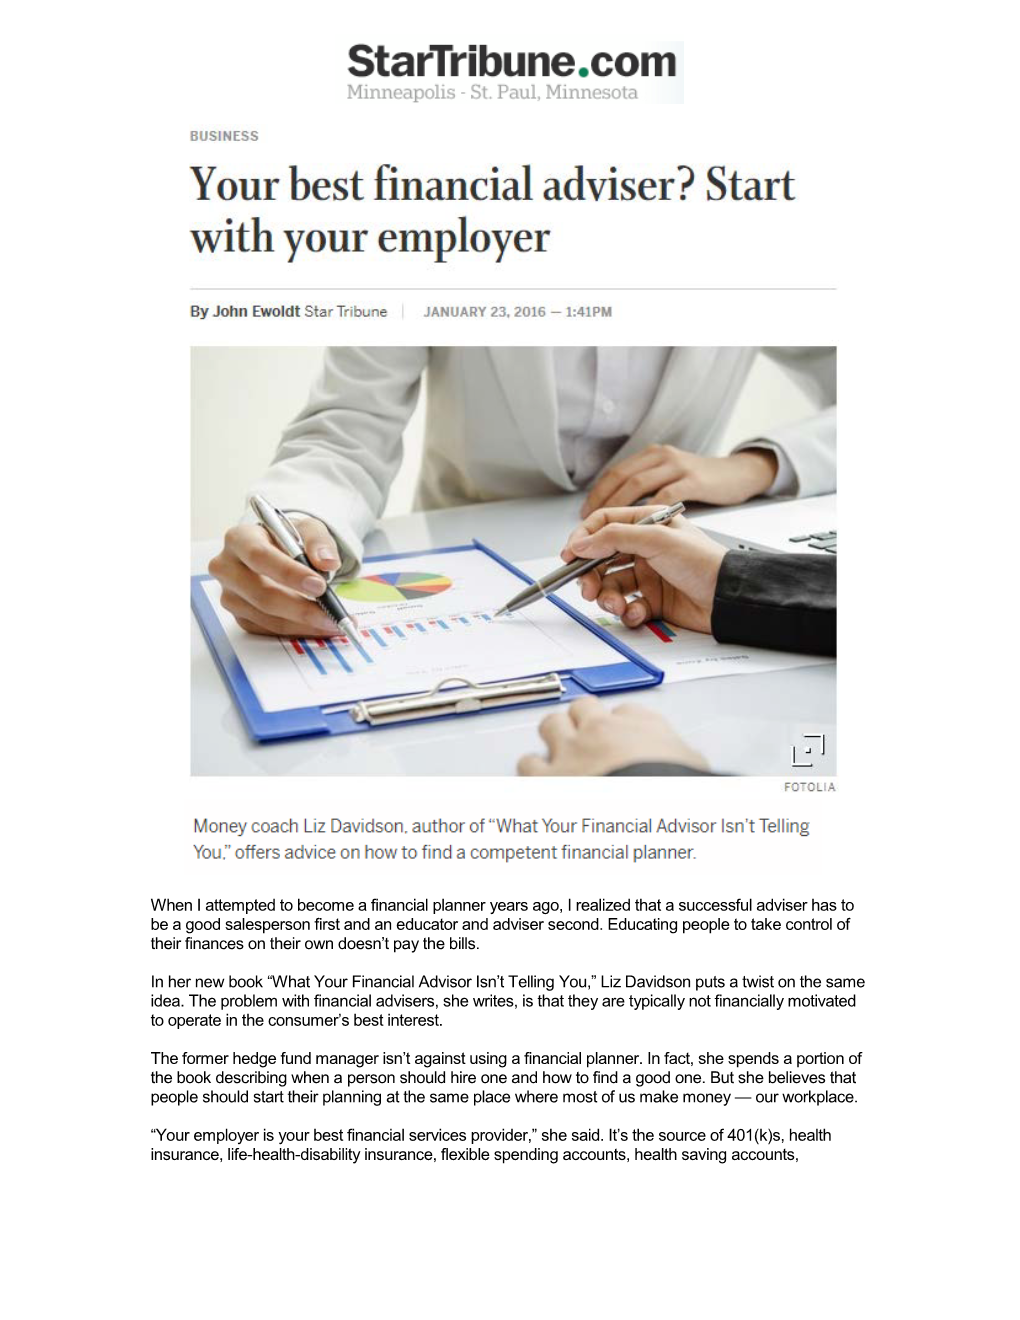 When I Attempted to Become a Financial Planner Years Ago, I Realized That a Successful Adviser Has to Be a Good Salesperson First and an Educator and Adviser Second